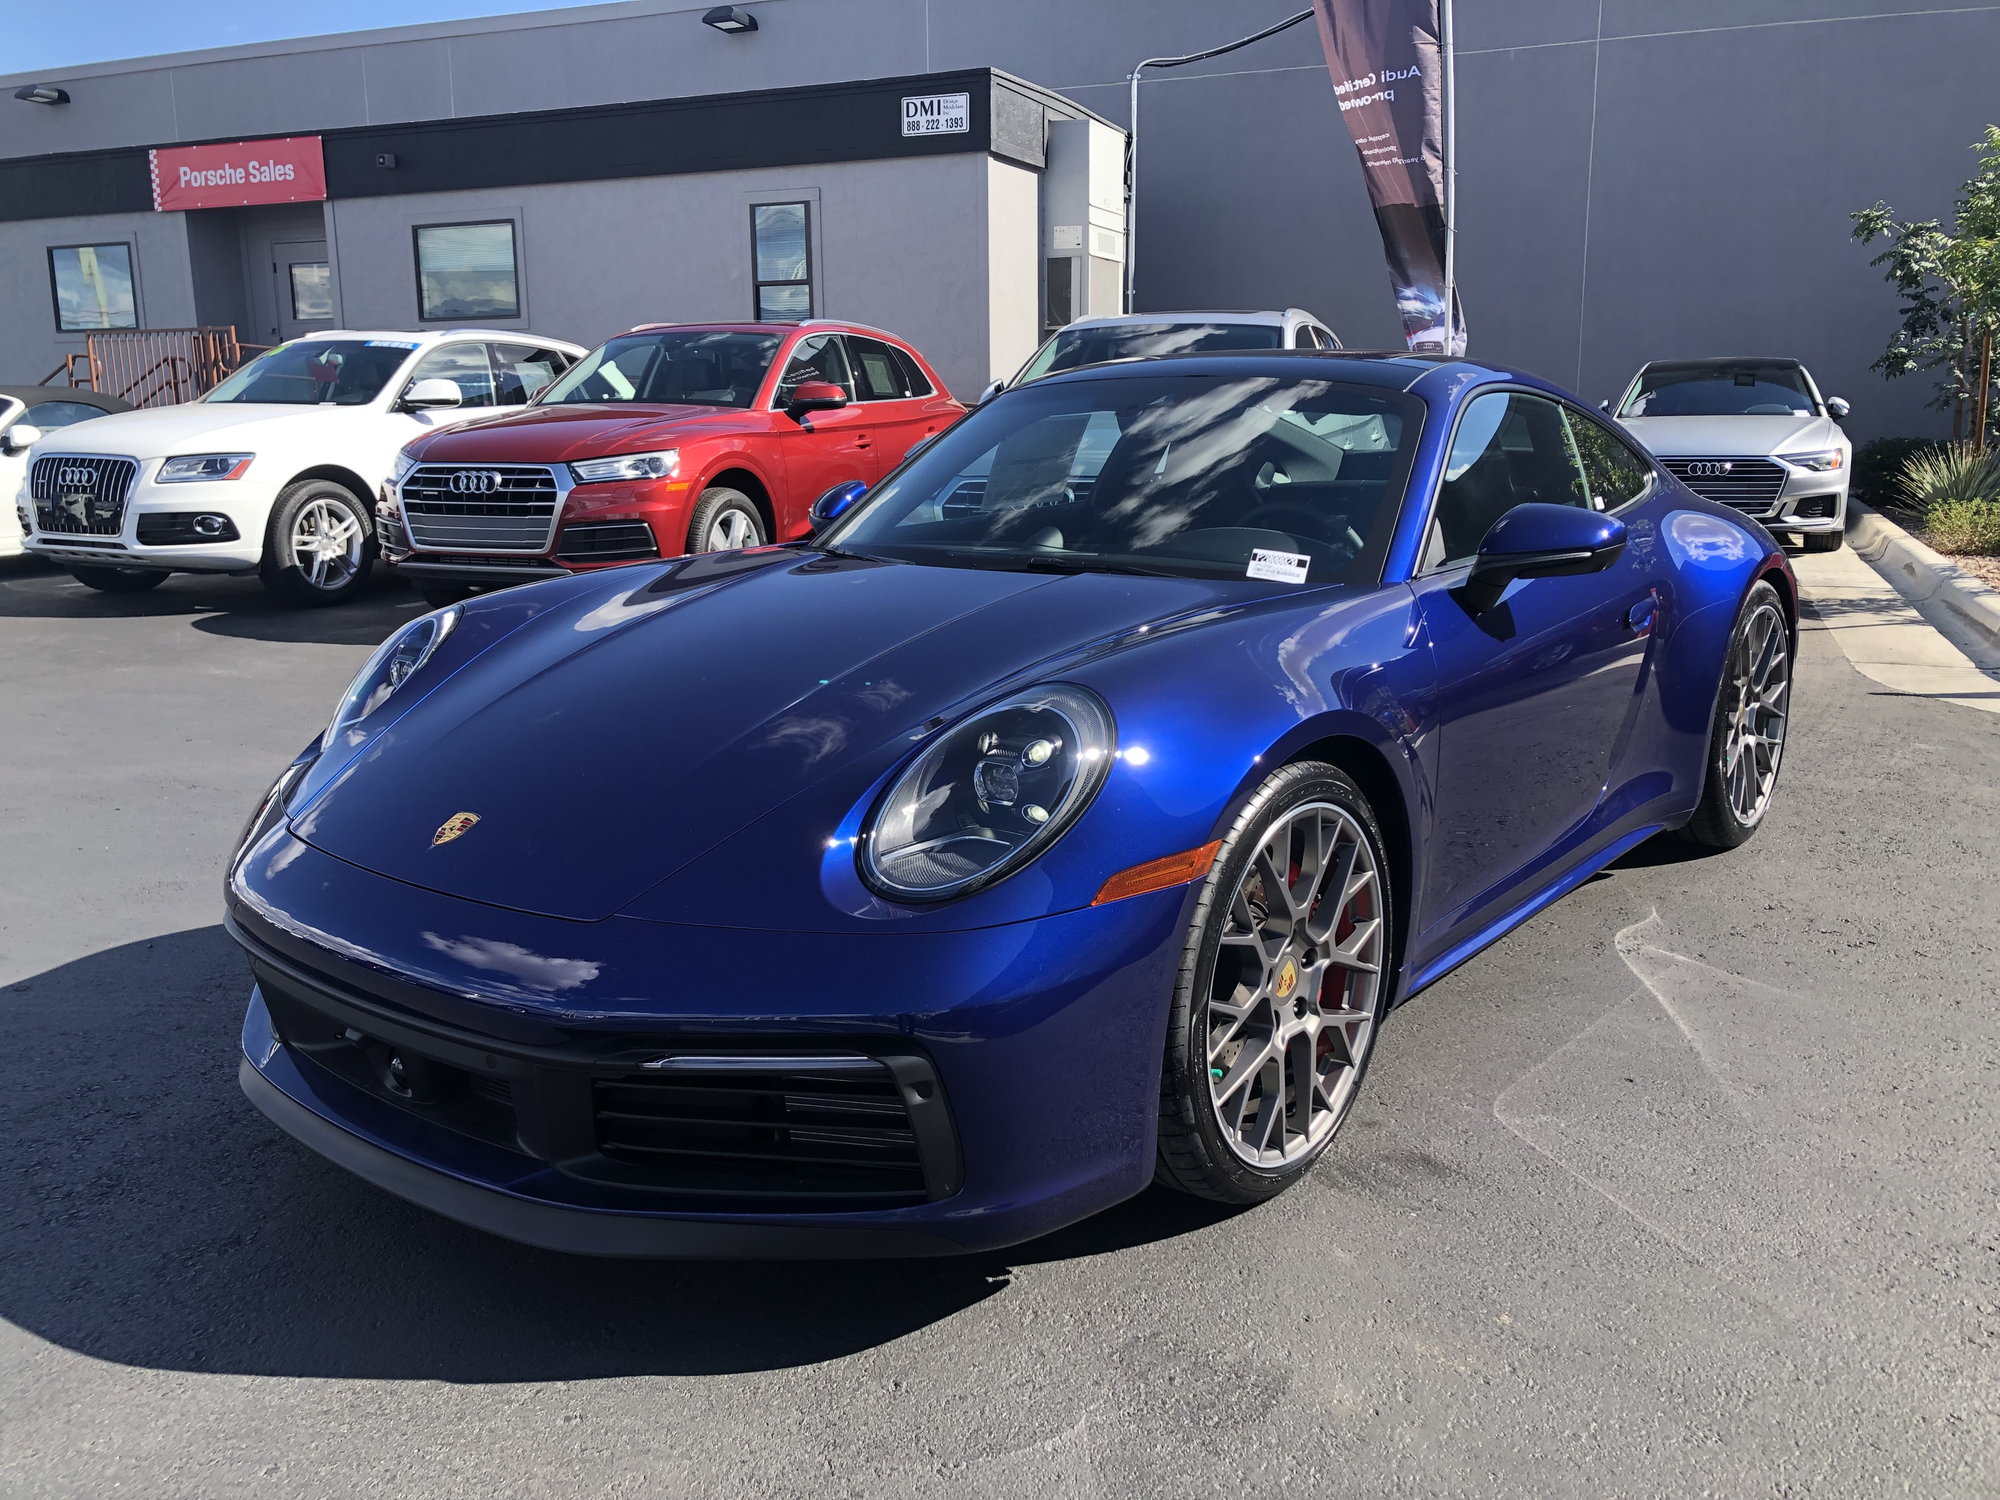 2020 Gentian Blue 992 911 4s Available For Immediate Delivery Rennlist Pors...